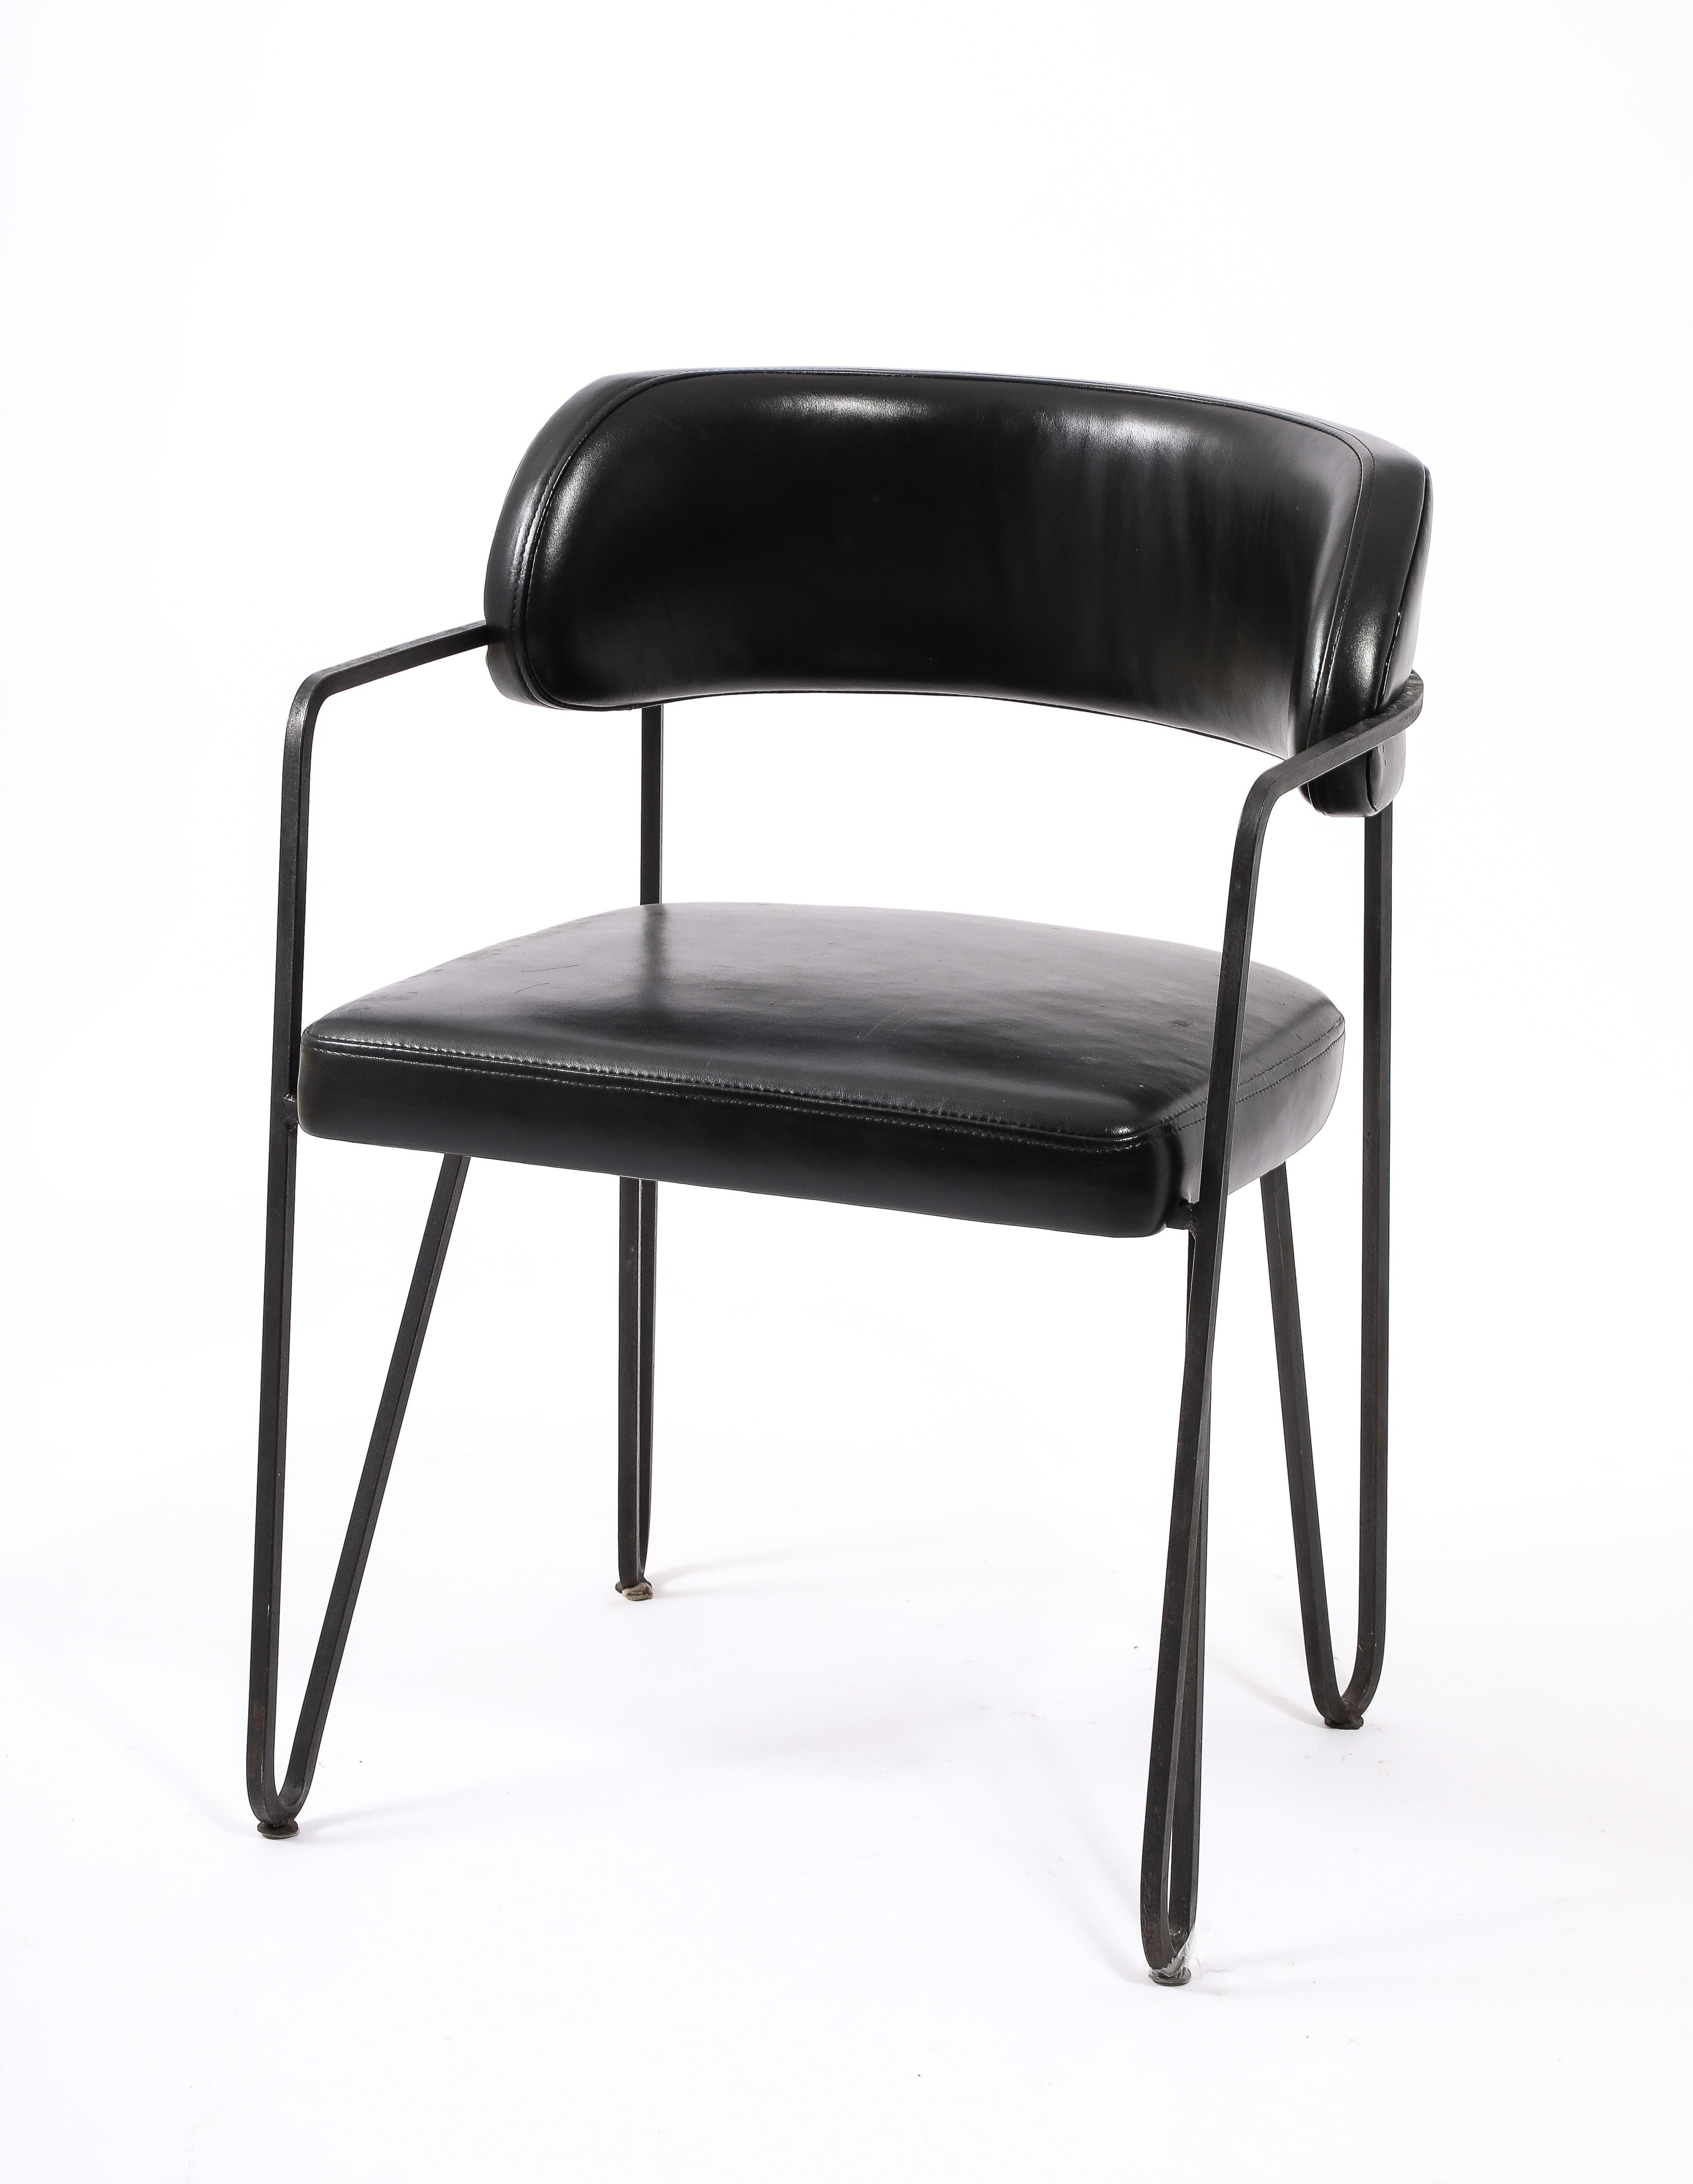 Mid-Century Modern Square Wrought Iron Chairs in the Manner of Quinet, France 1960's For Sale